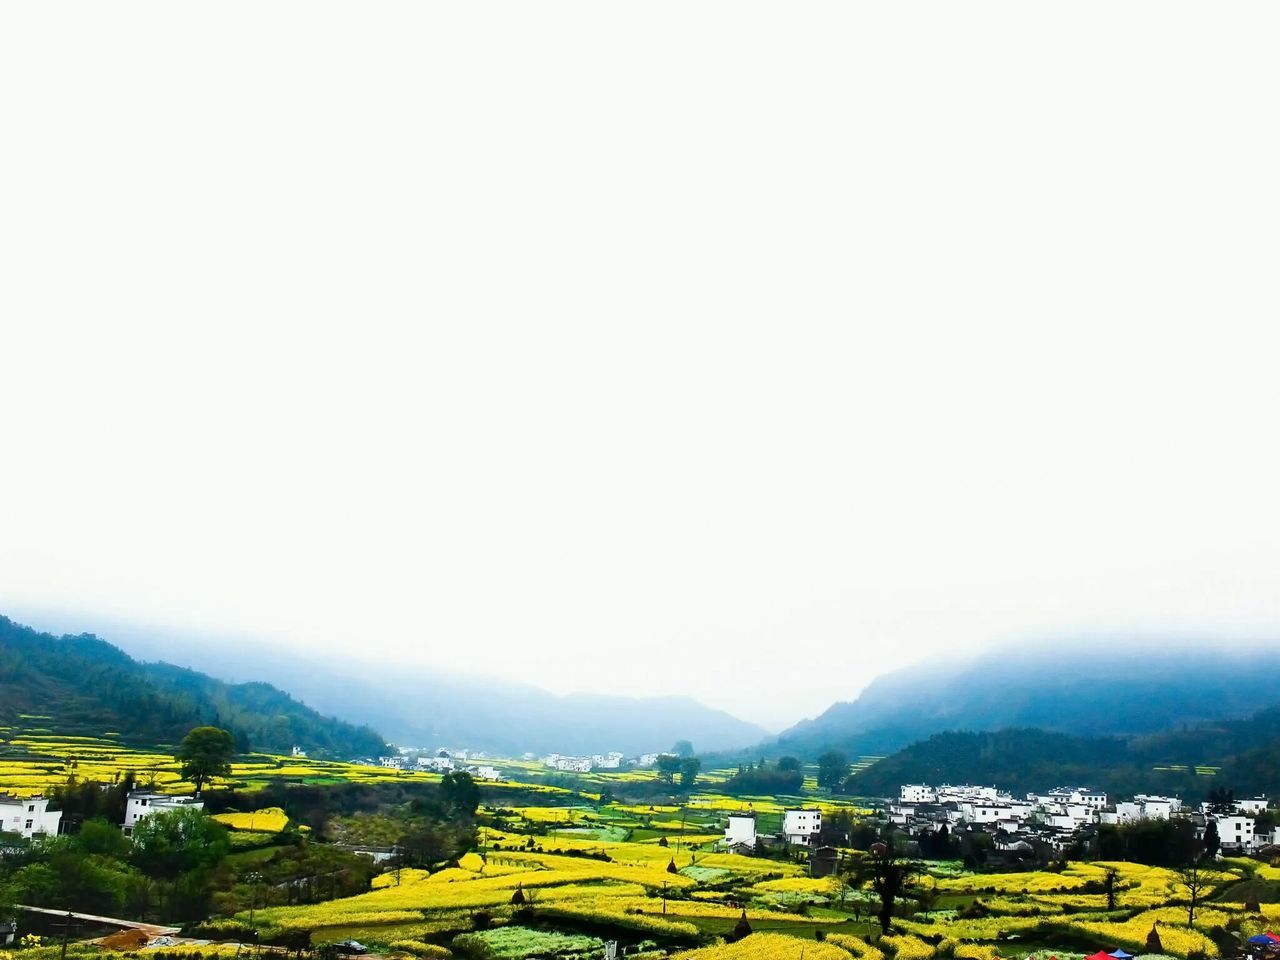 mountain, landscape, beauty in nature, scenics, tranquil scene, nature, mountain range, tranquility, growth, copy space, field, building exterior, built structure, clear sky, yellow, sky, agriculture, rural scene, house, architecture